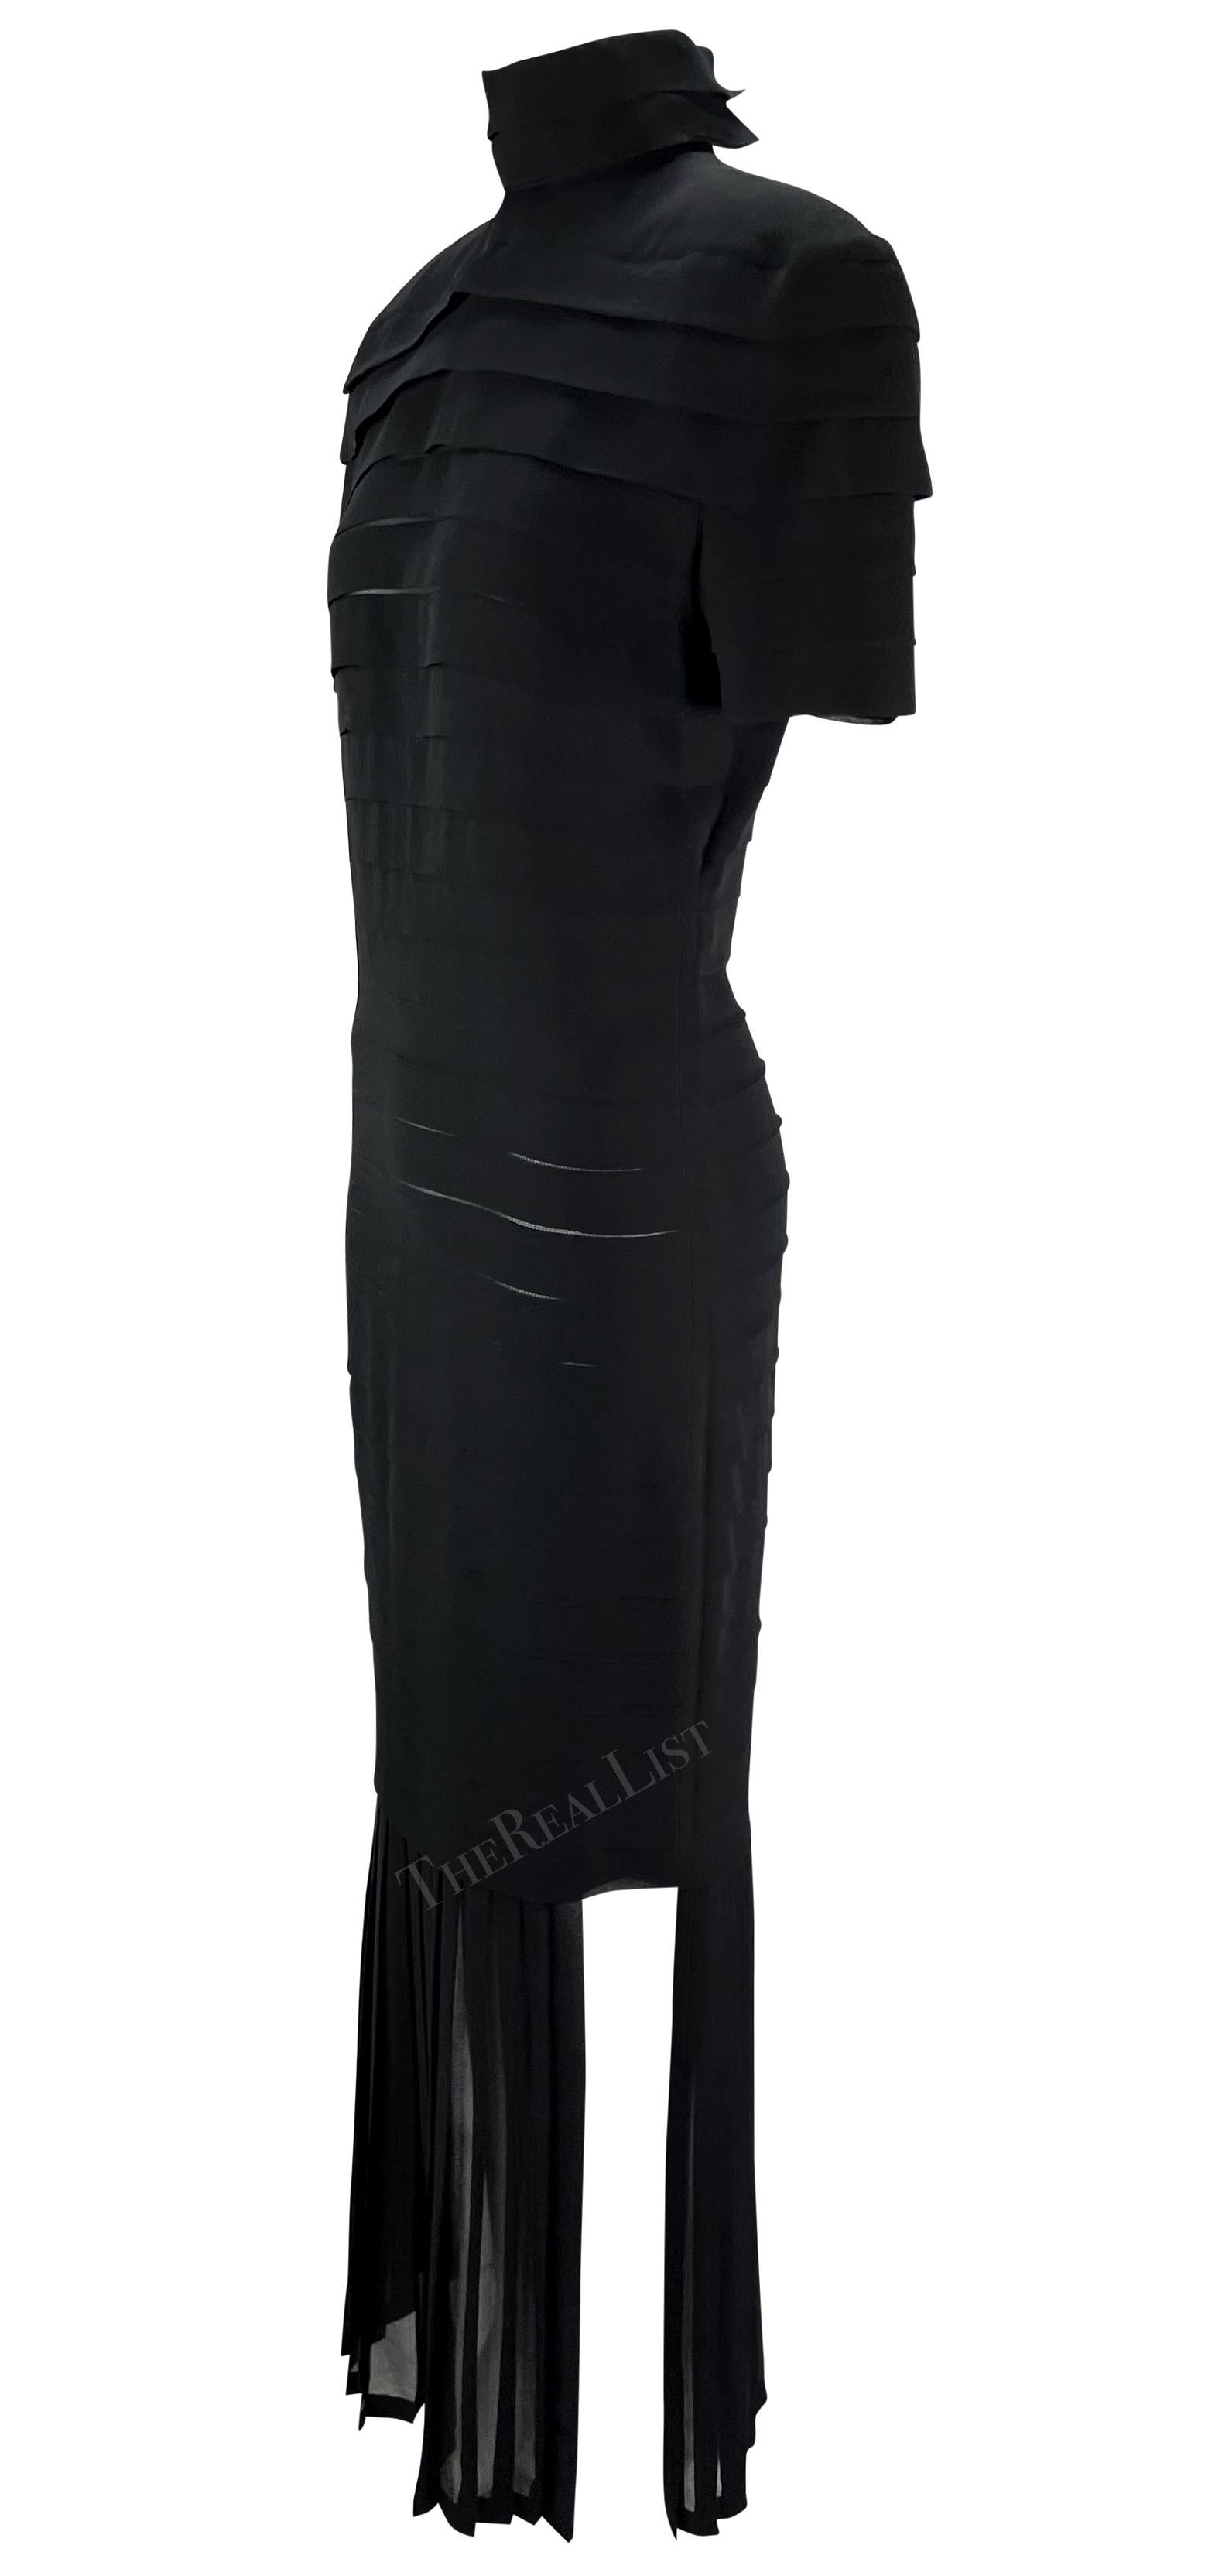 S/S 1987 Gianni Versace Runway Ad Black Pleated Sheer Slit Silk Gown  For Sale 4